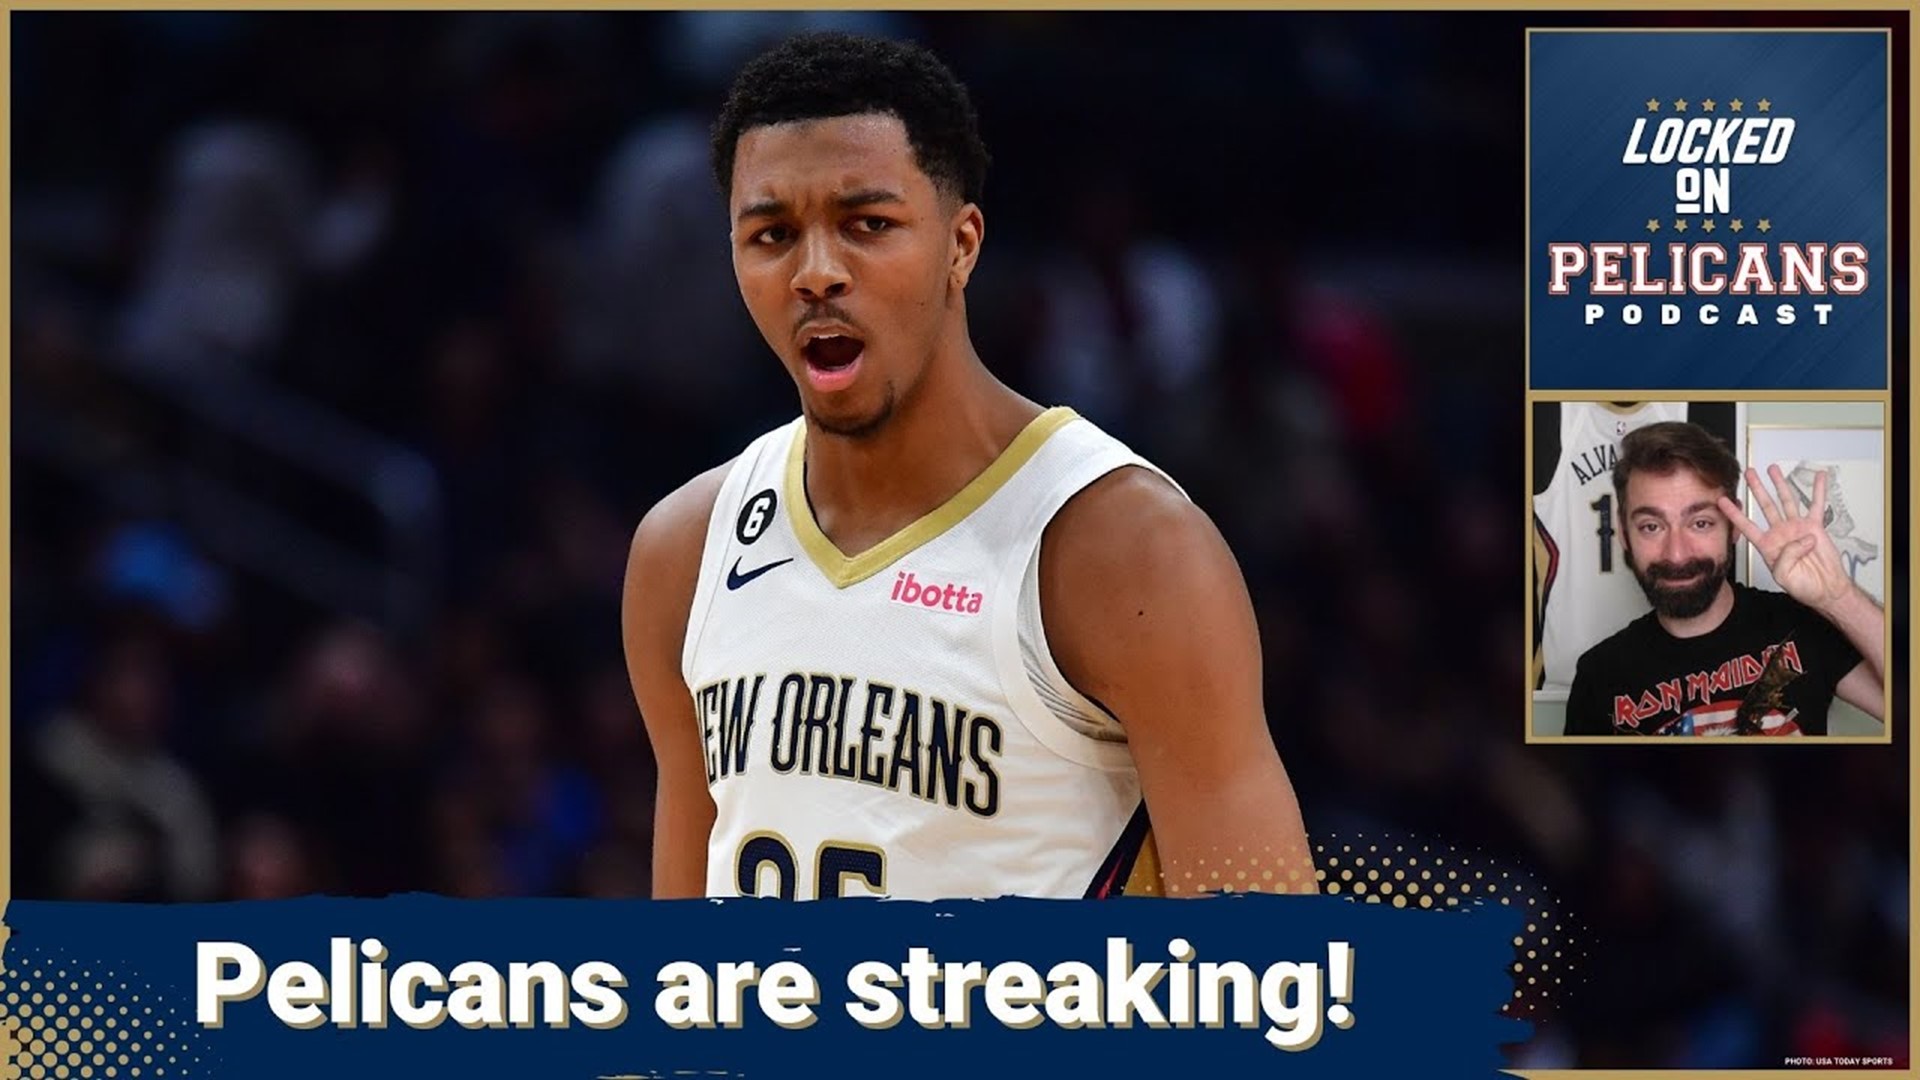 The New Orleans Pelicans are on a 4 game winning streak! Jake Madison explains how the Pels have finally unlocked Brandon Ingram and Trey Murphy III